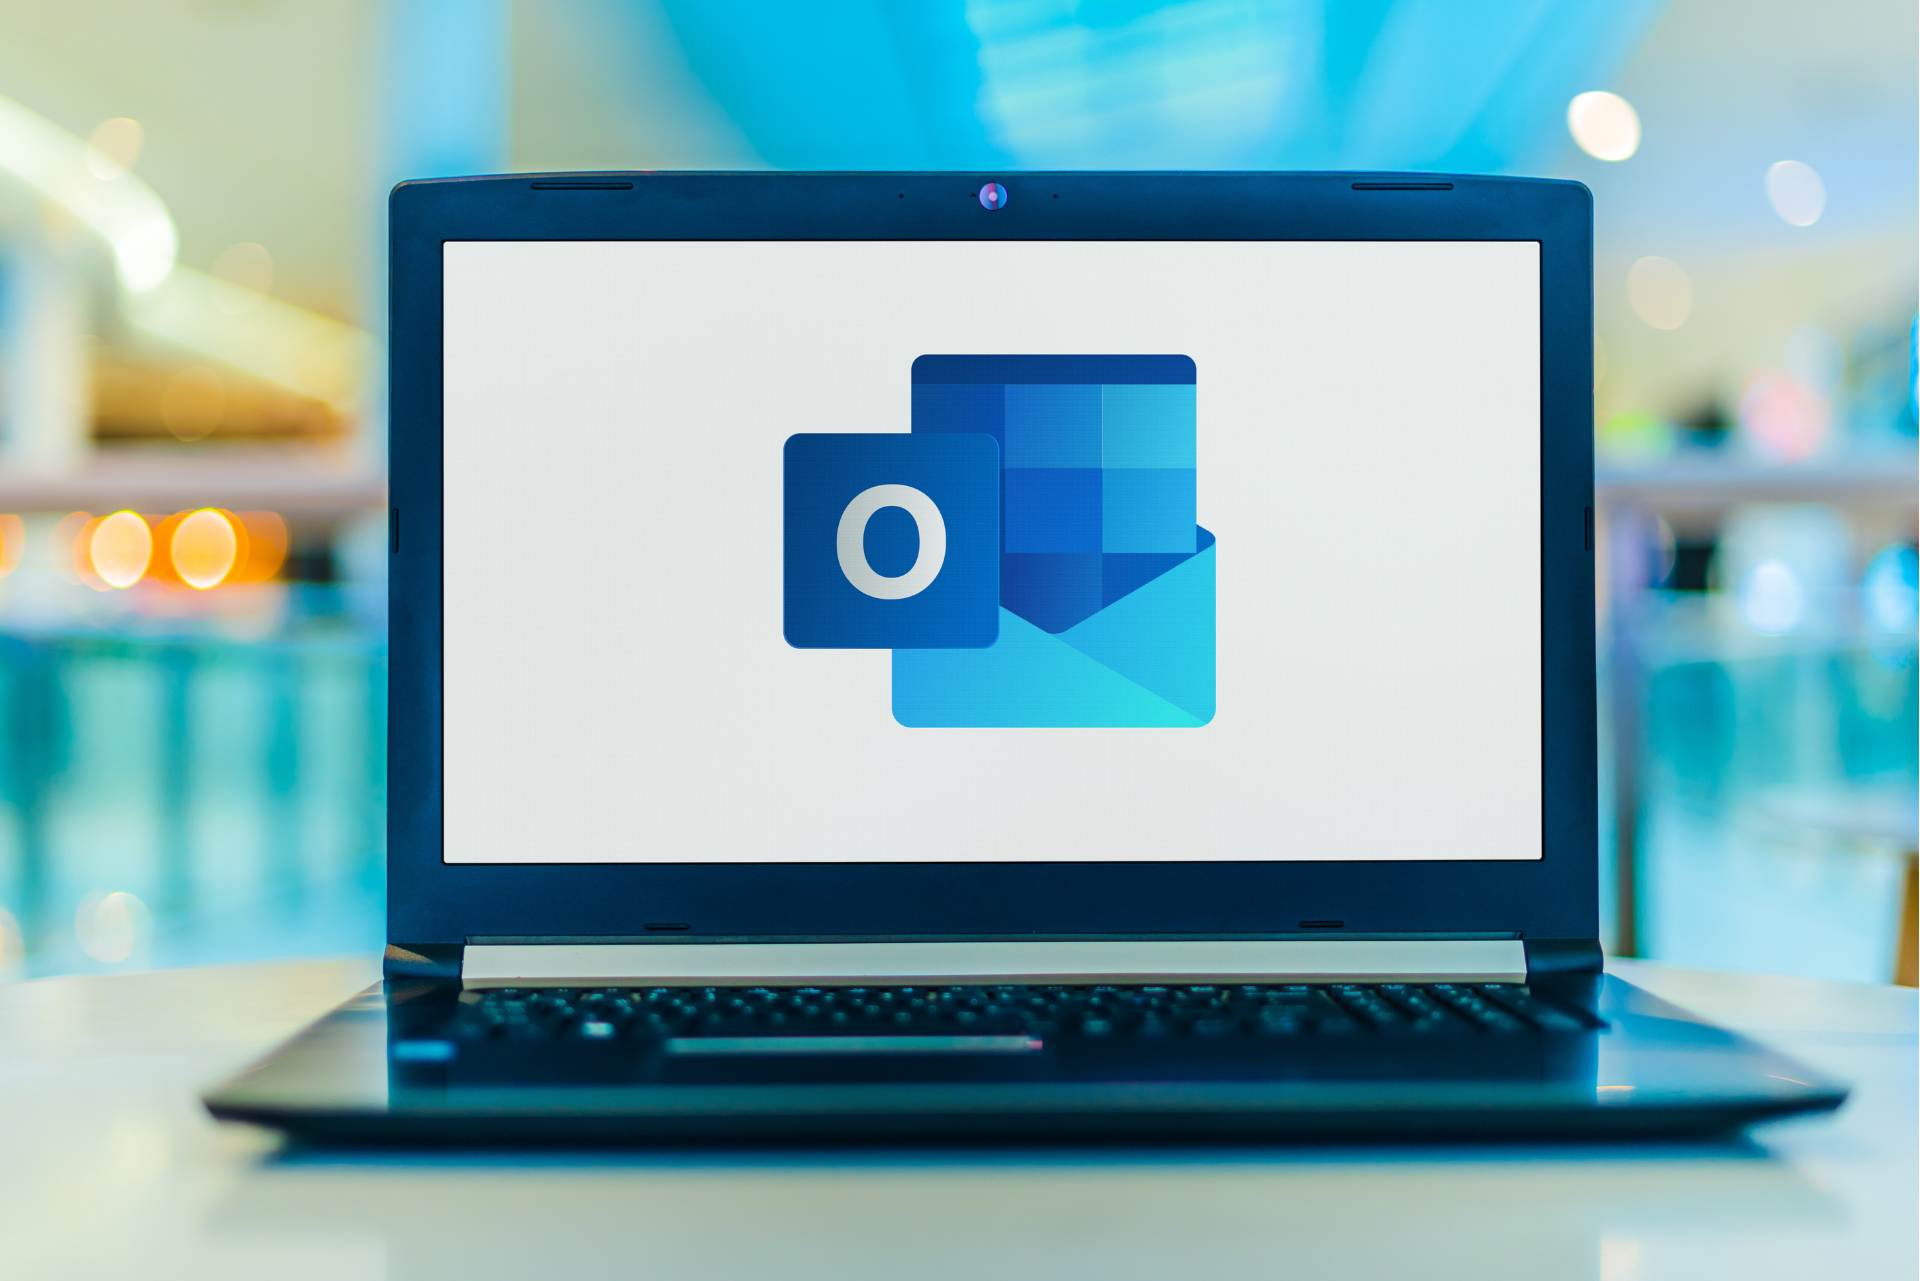 Use Outlook like a professional with these 5 features